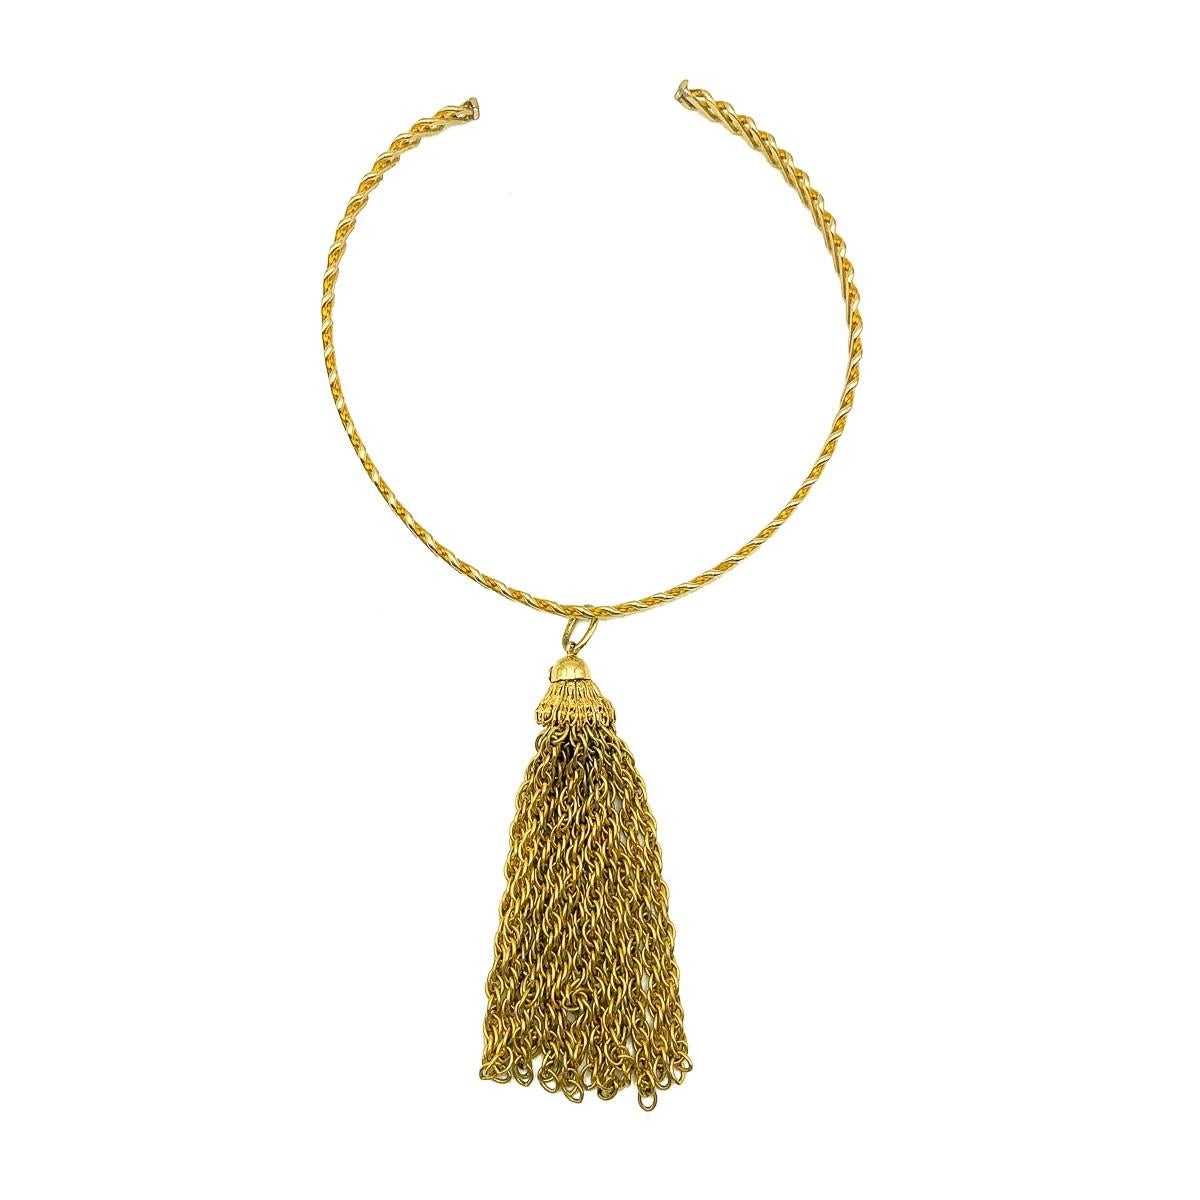 A striking Vintage Grosse Tassle Choker necklace straight out of the 1970s and 1970 to be precise. Crafted in gold plated metal. A crisscross patterned collar gives way to a neck enhancing long drop tassle that moves beautifully being created from